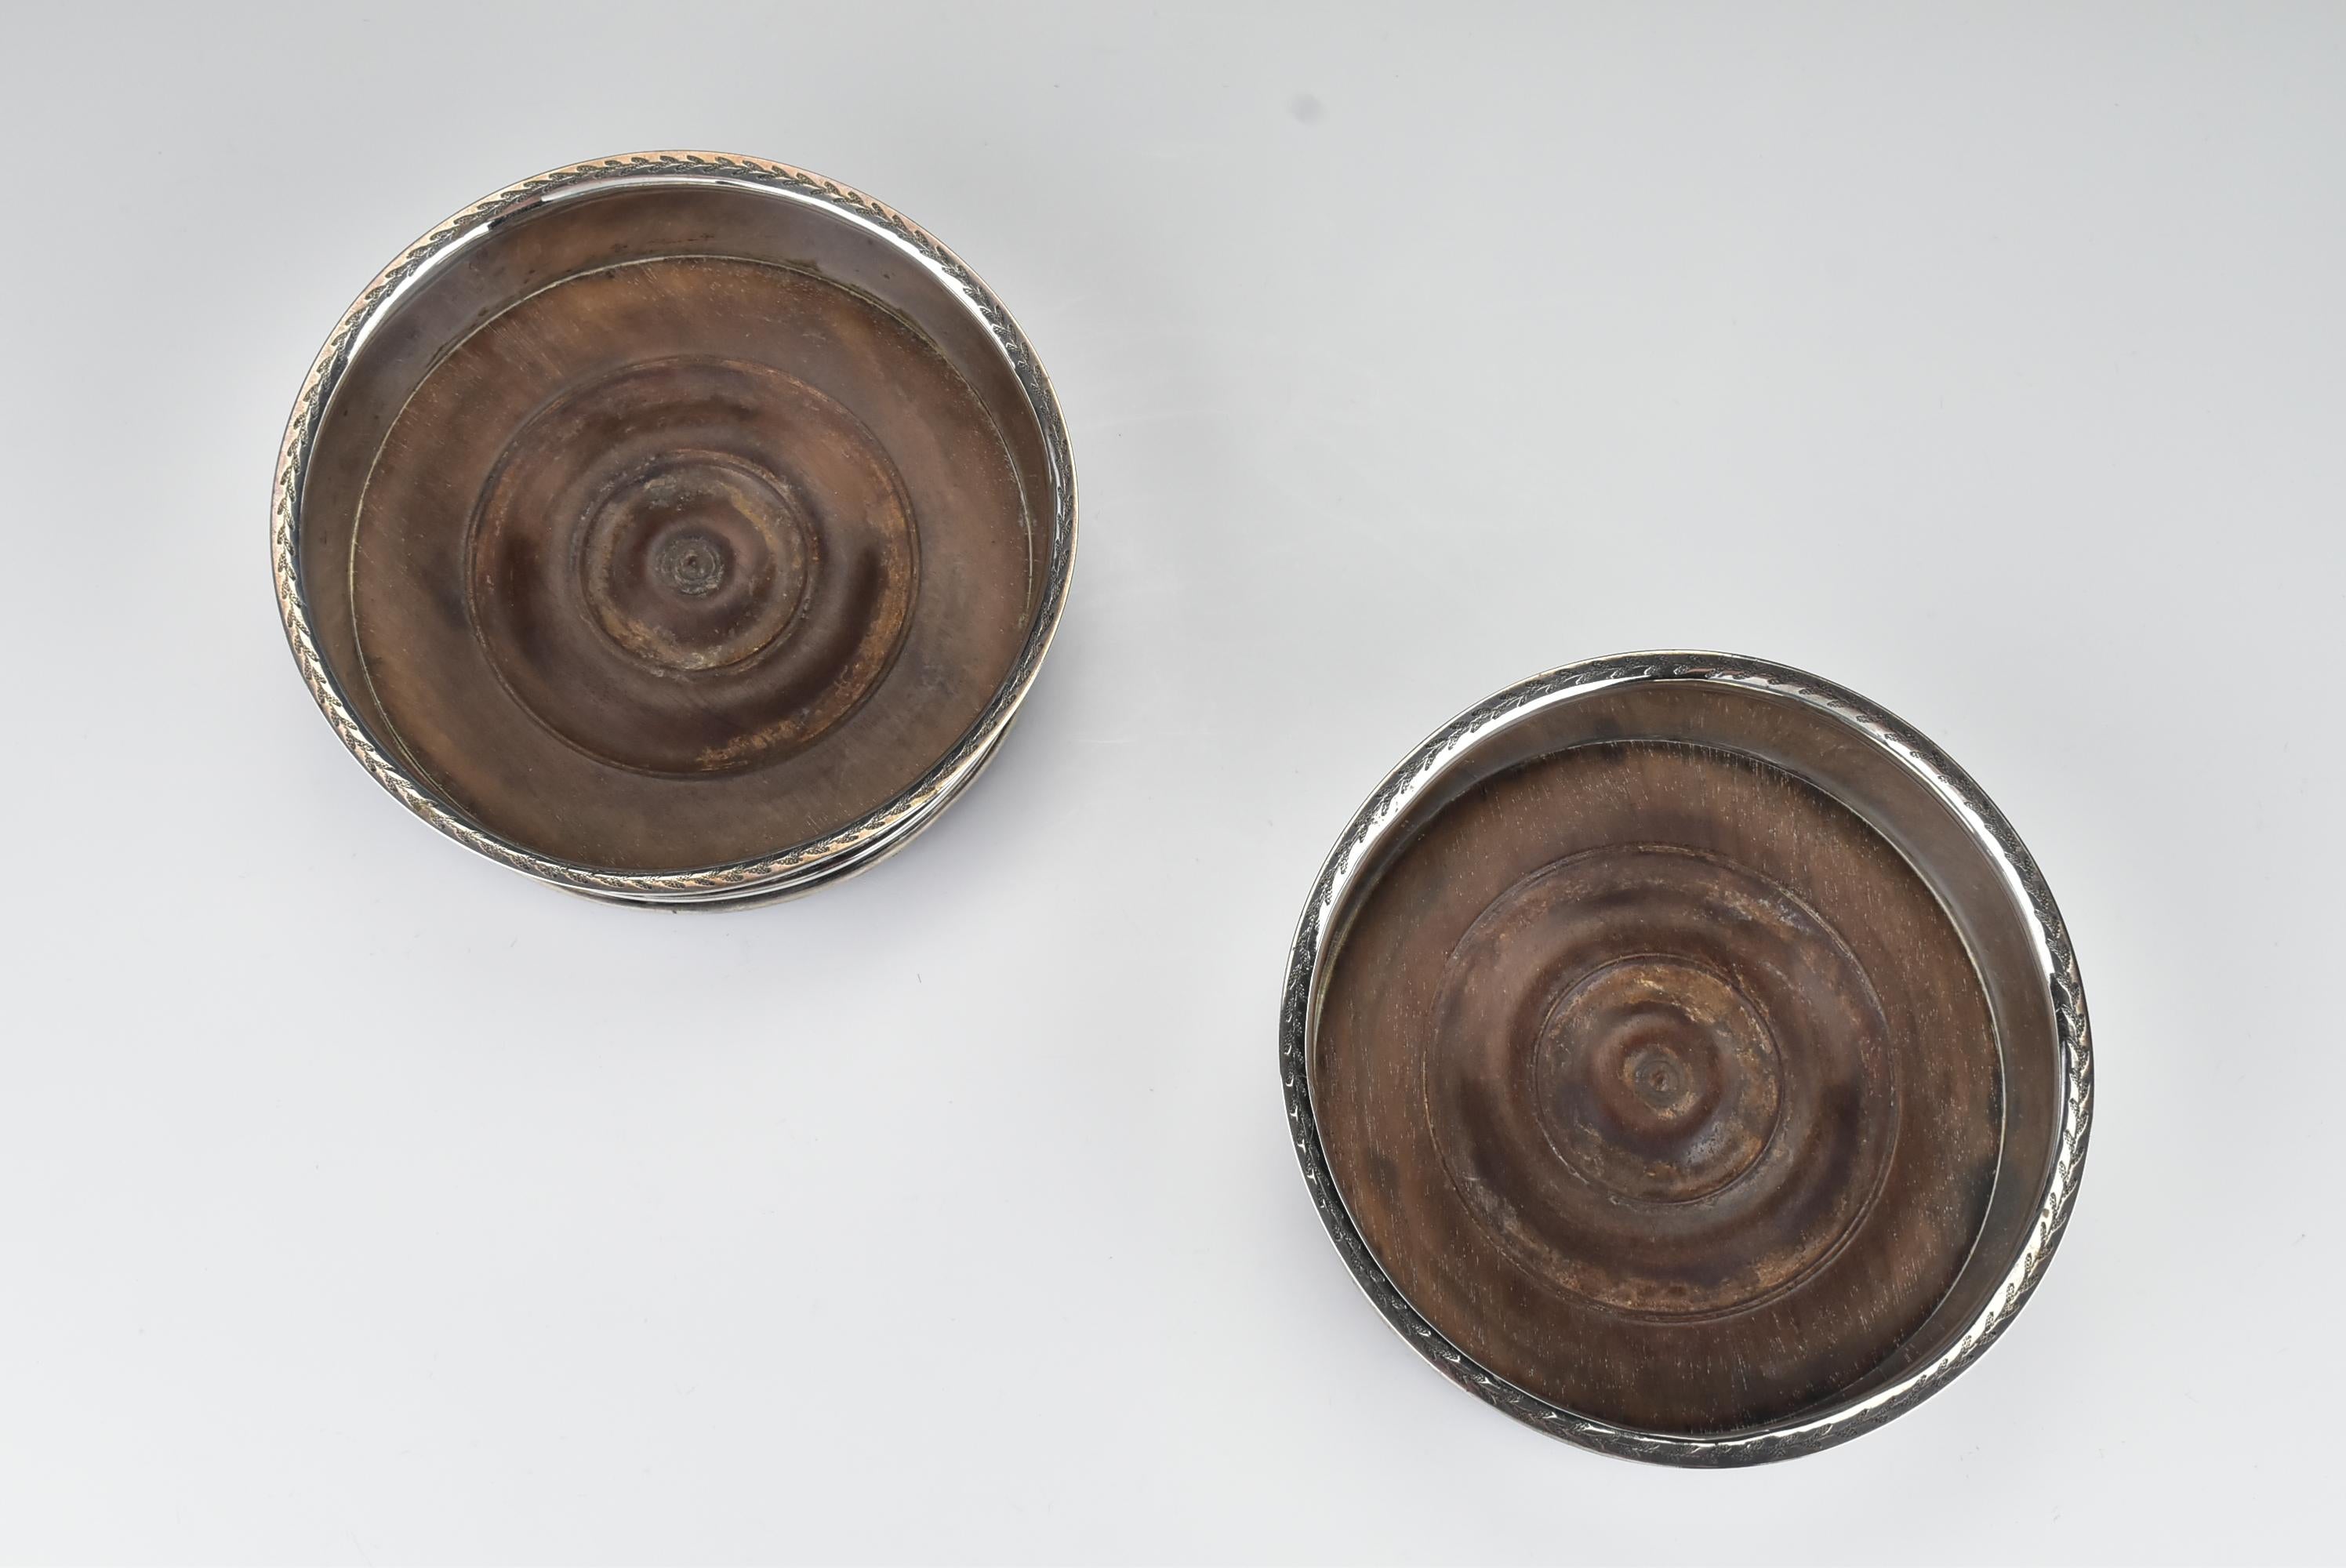 British Pair of 1800 English Sterling Silver Wine Coasters by William Sumner I of London